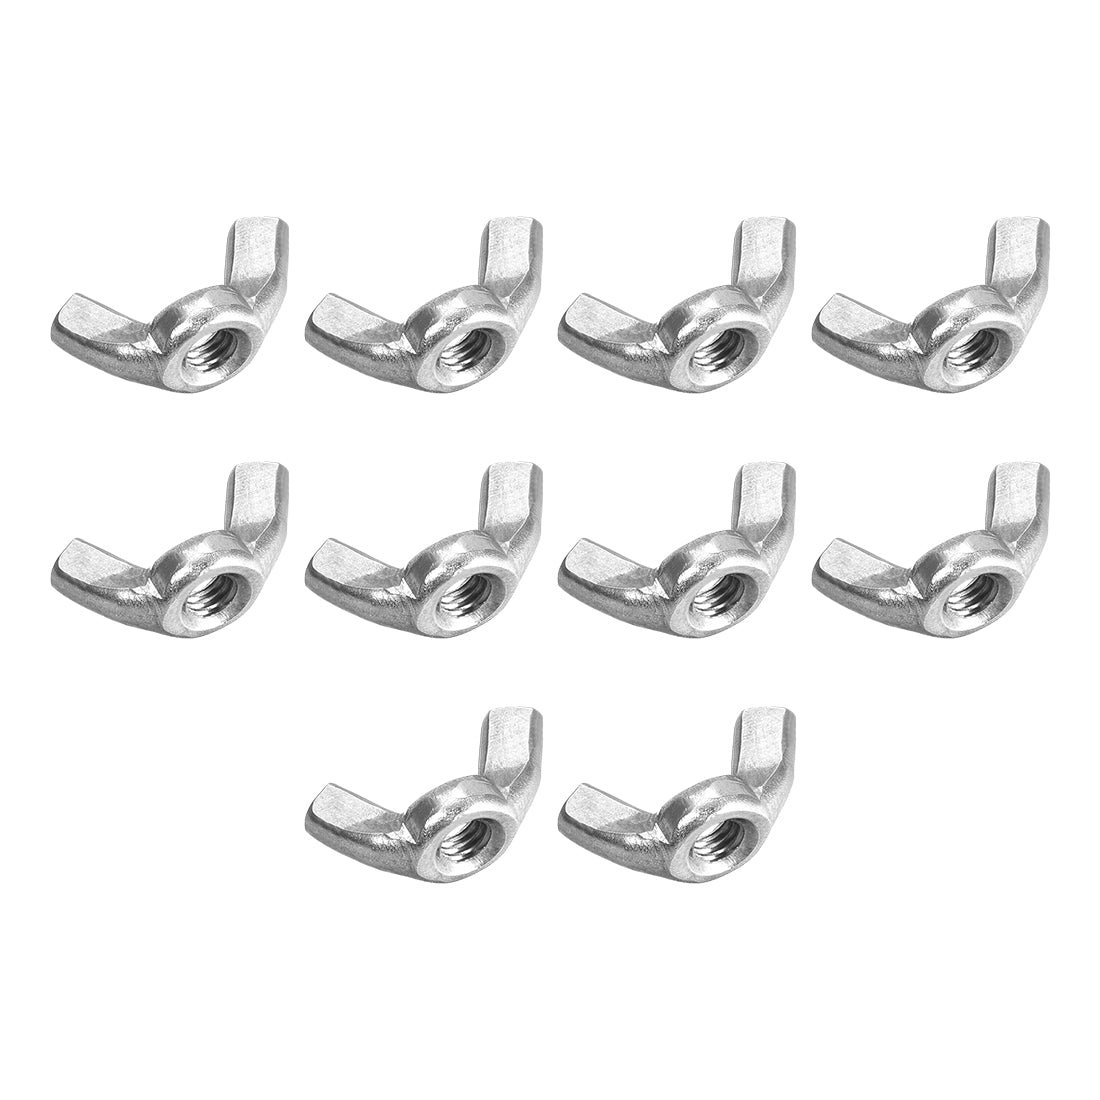 uxcell Uxcell Metric Wing Nuts, Stainless Steel 304 Hand Twist Tighten Ear Butterfly Nut, 10 Pcs